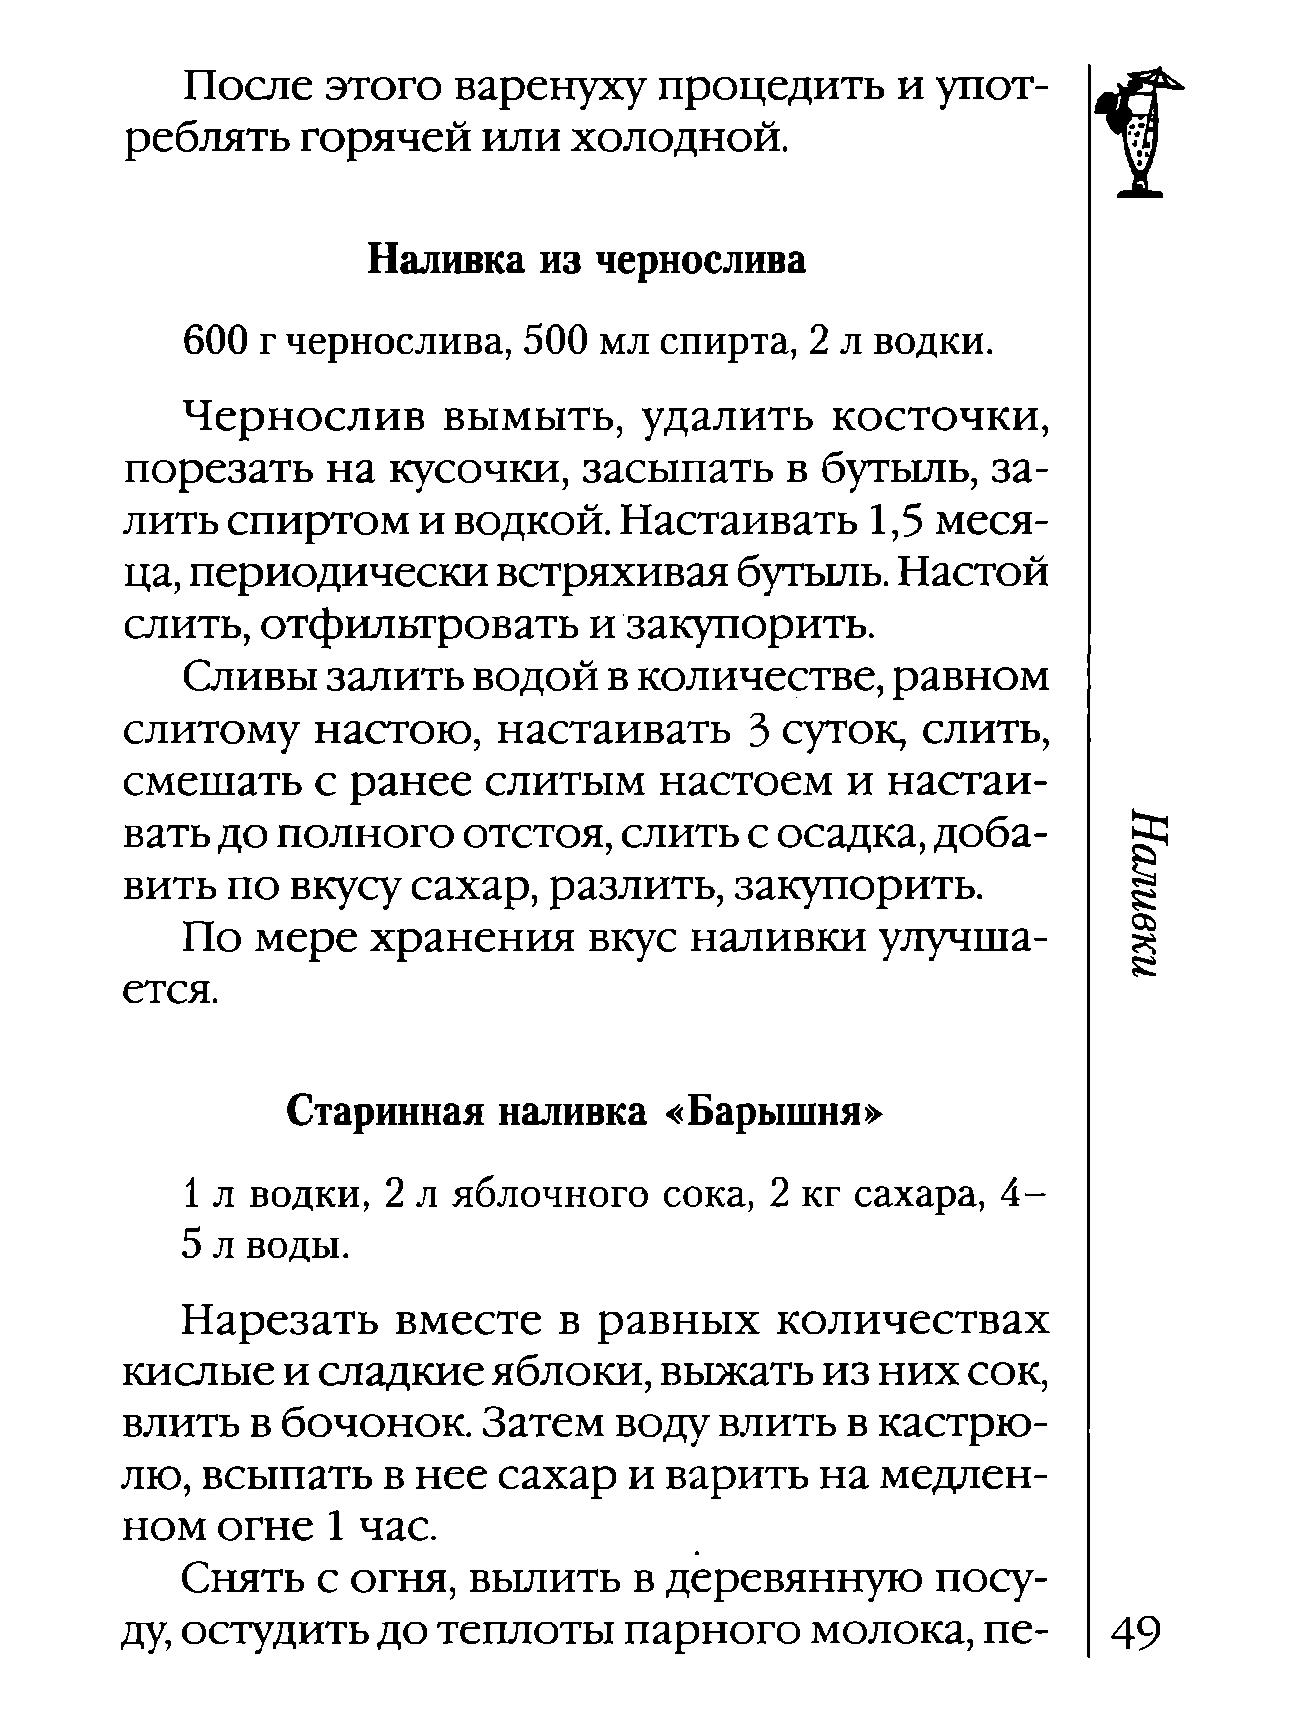 Page49